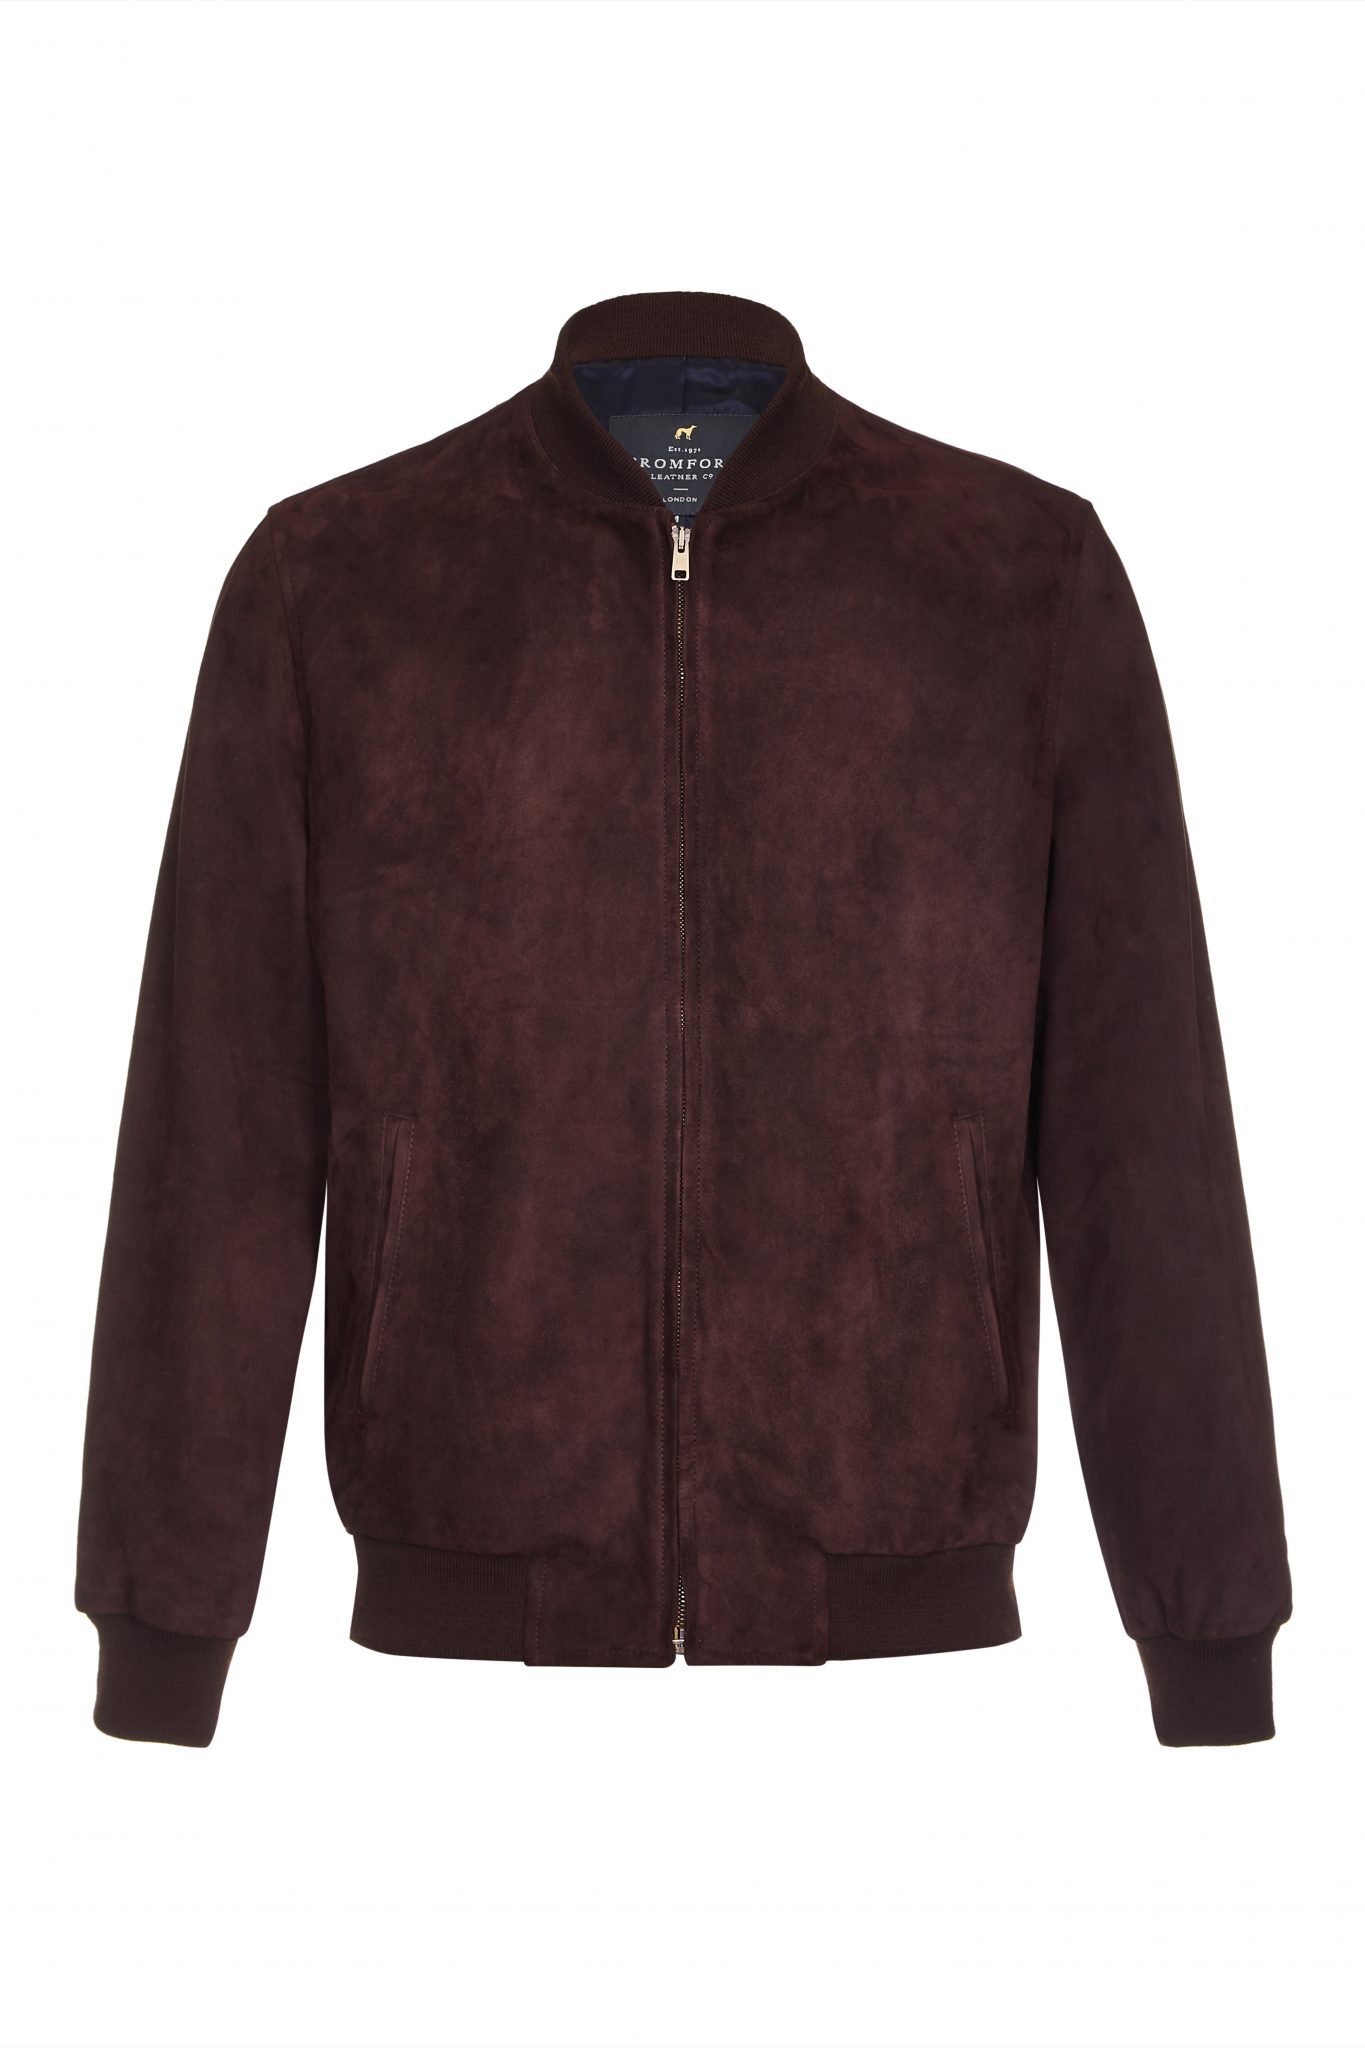 Delon, suede bomber jacket from Cromford Leather's own collection.